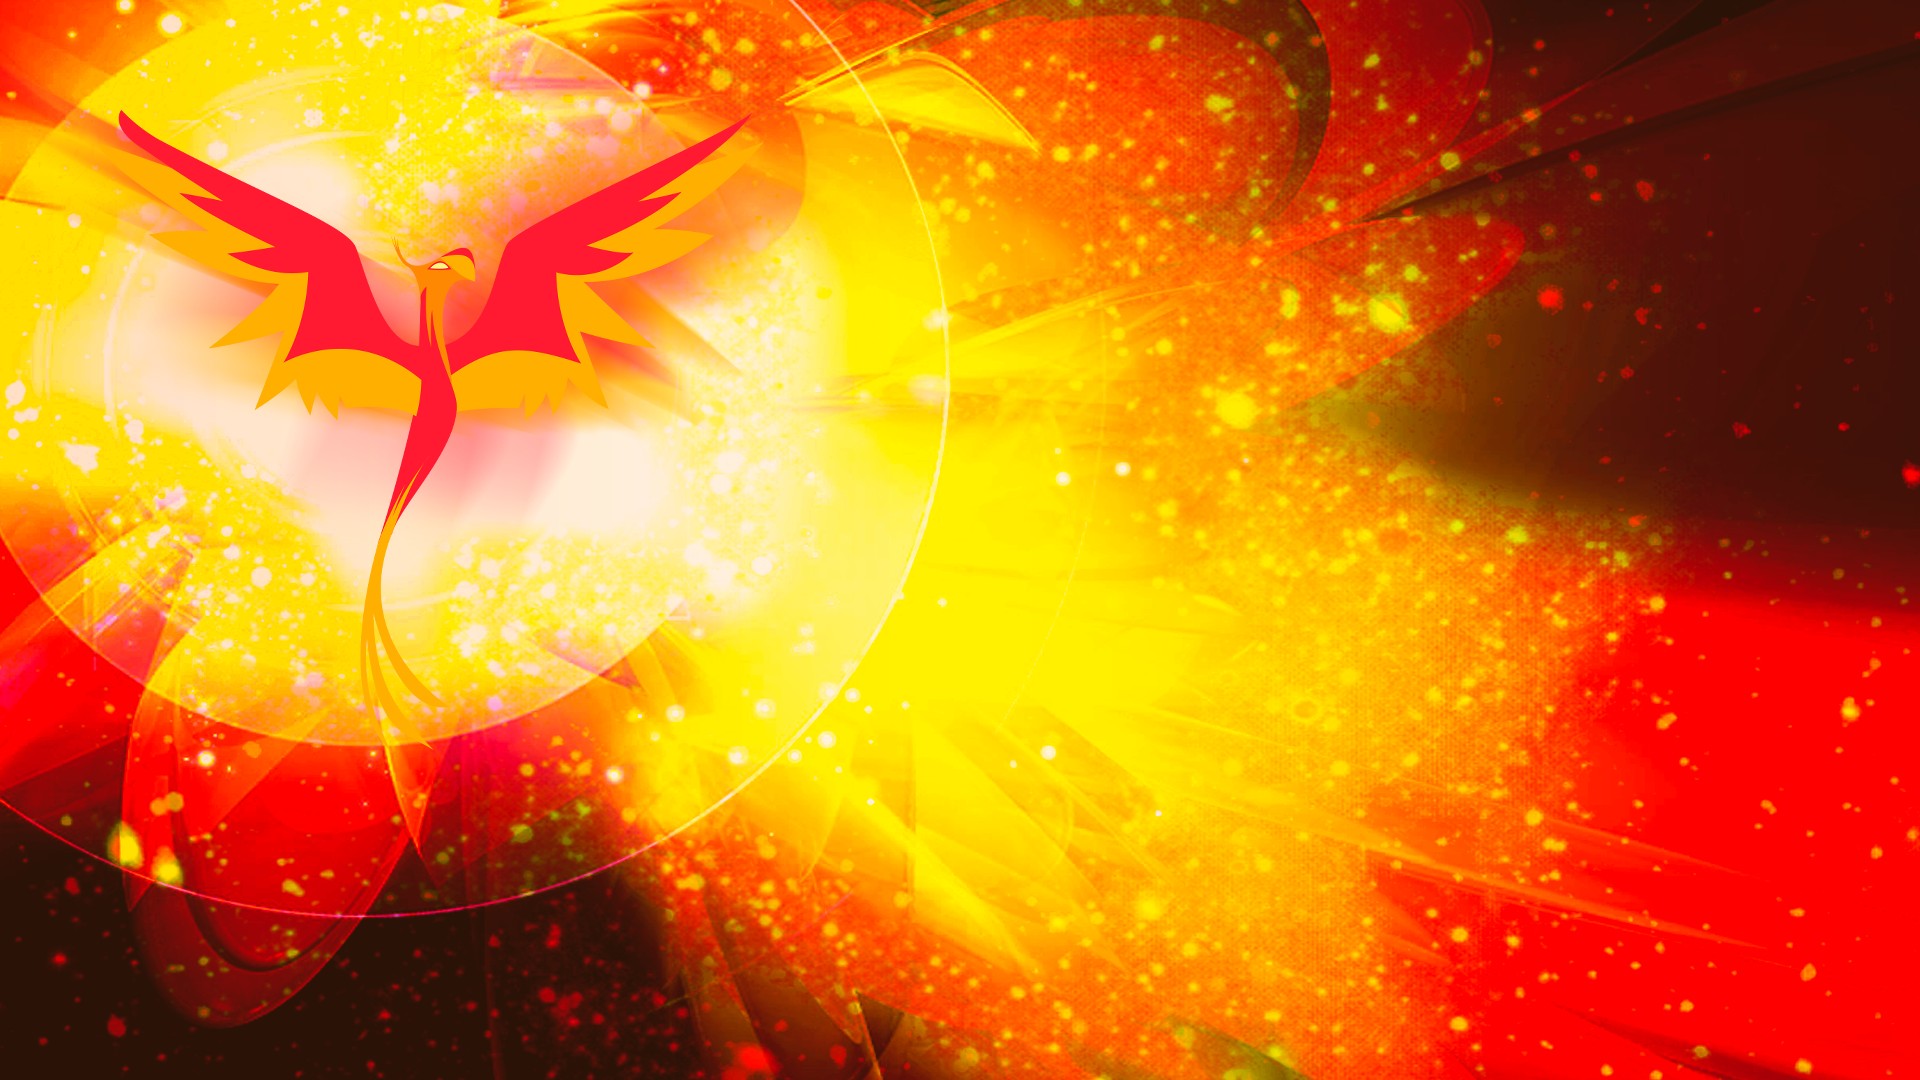 HD Phoenix Bird Backgrounds with image resolution 1920x1080 pixel. You can use this wallpaper as background for your desktop Computer Screensavers, Android or iPhone smartphones